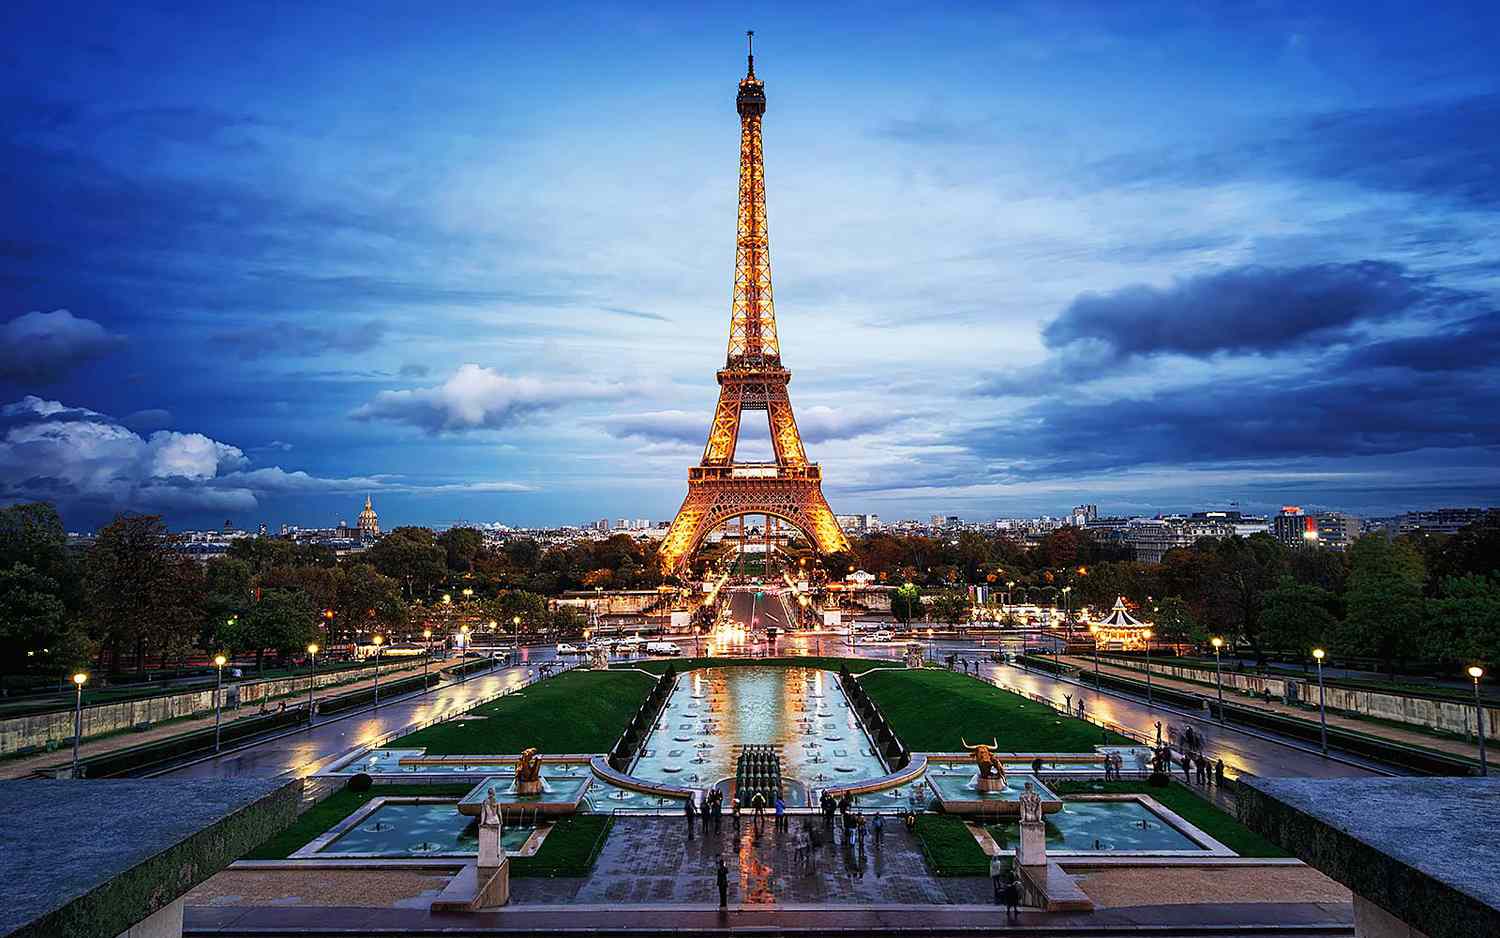 scenic view of the Eiffel Tower in Paris, France | Wedifys